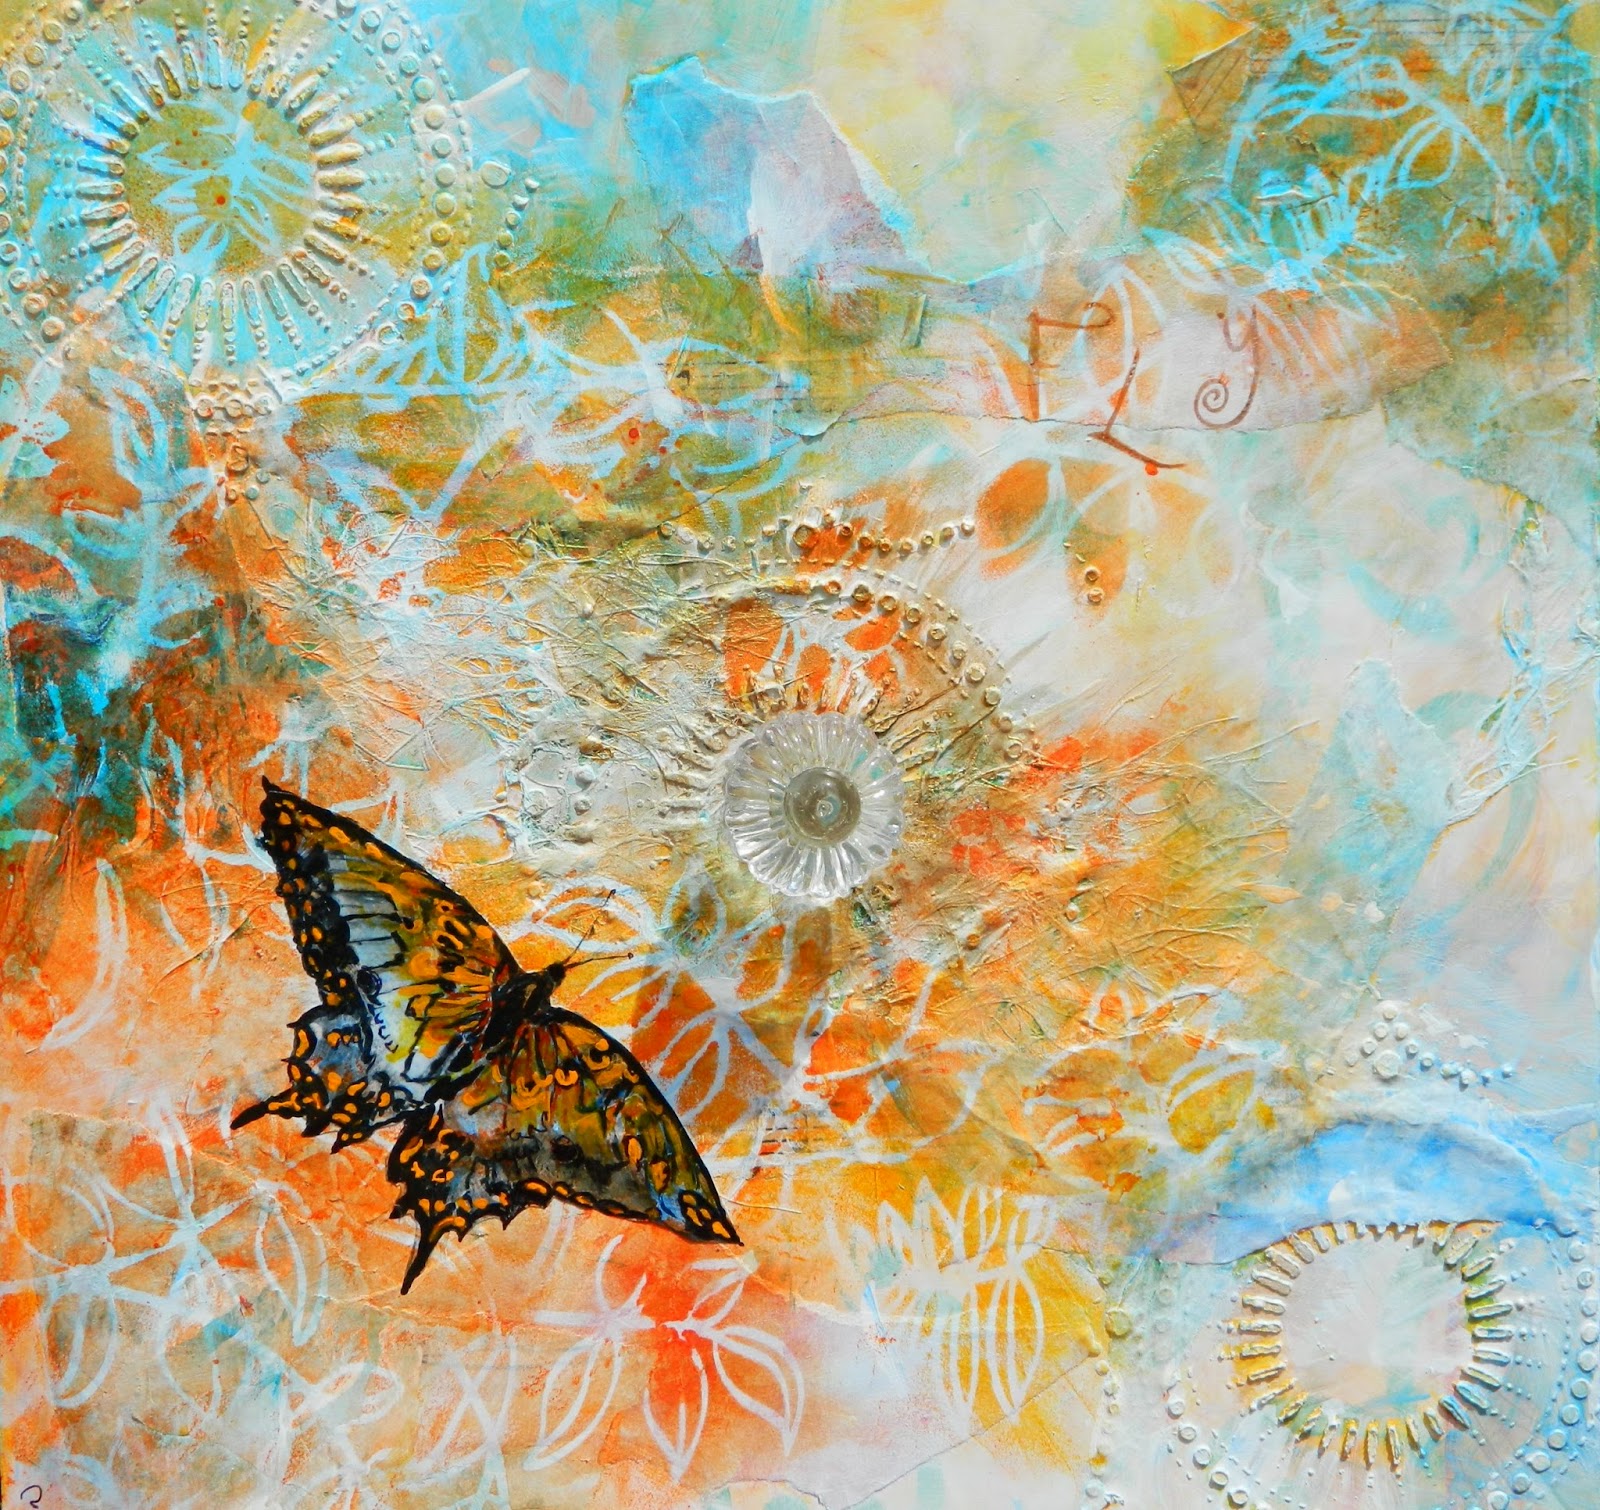 Abstract Artists International: “Fly” Butterfly Painting by Colorado ...